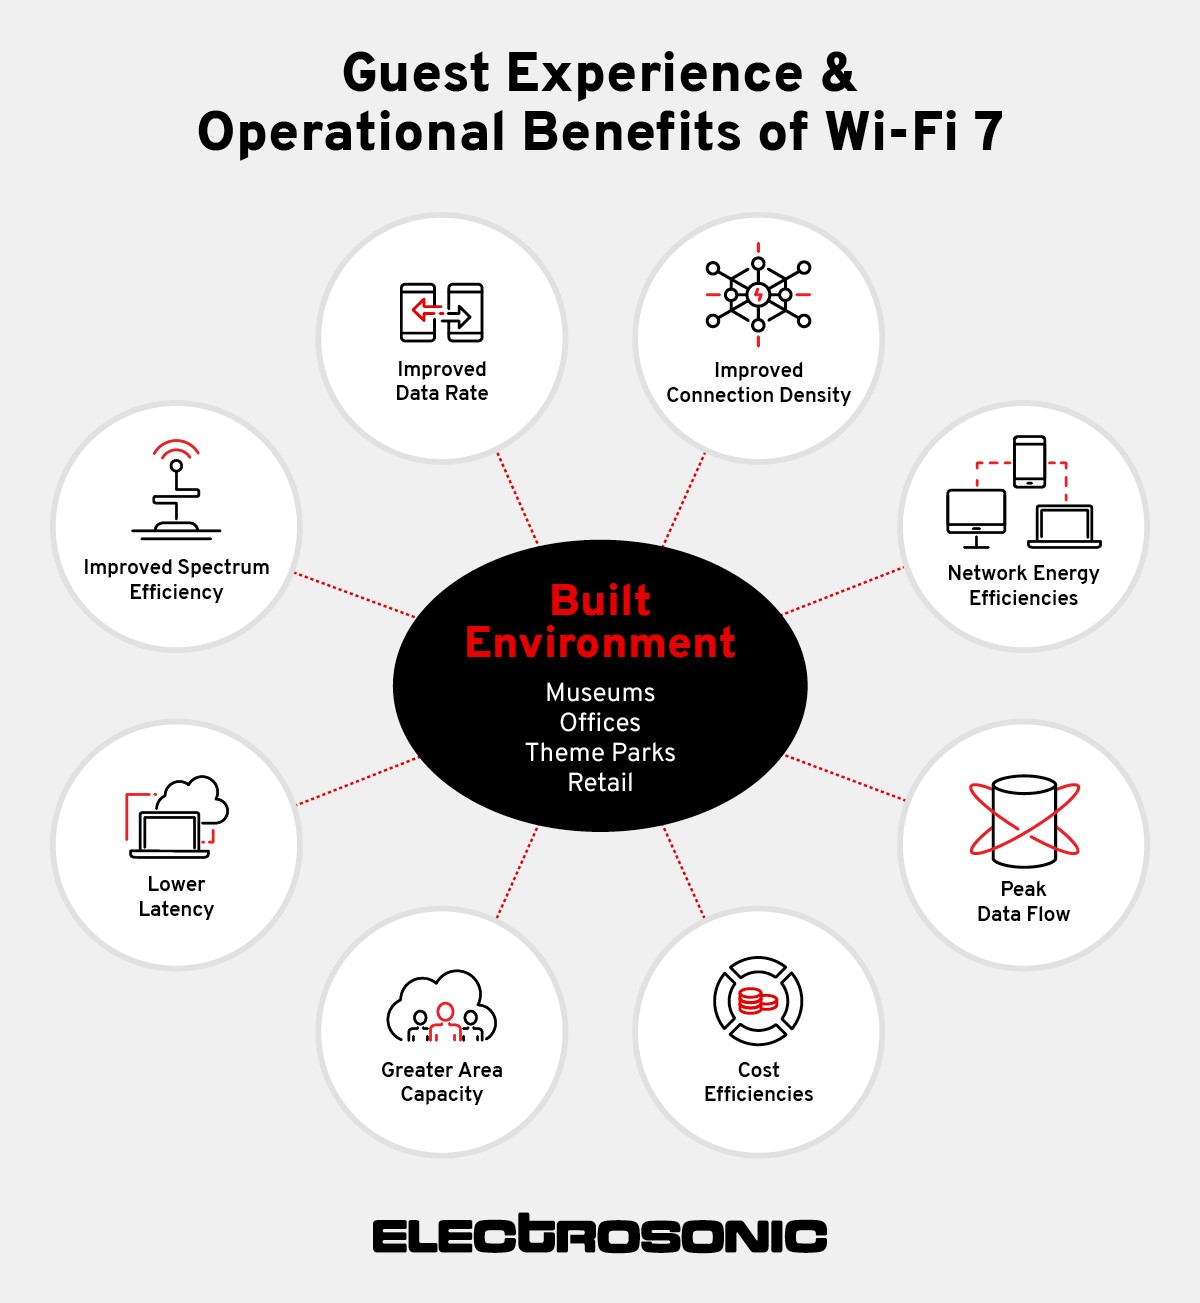 Guest Experiences and Operational Benefits of Wi-Fi 7